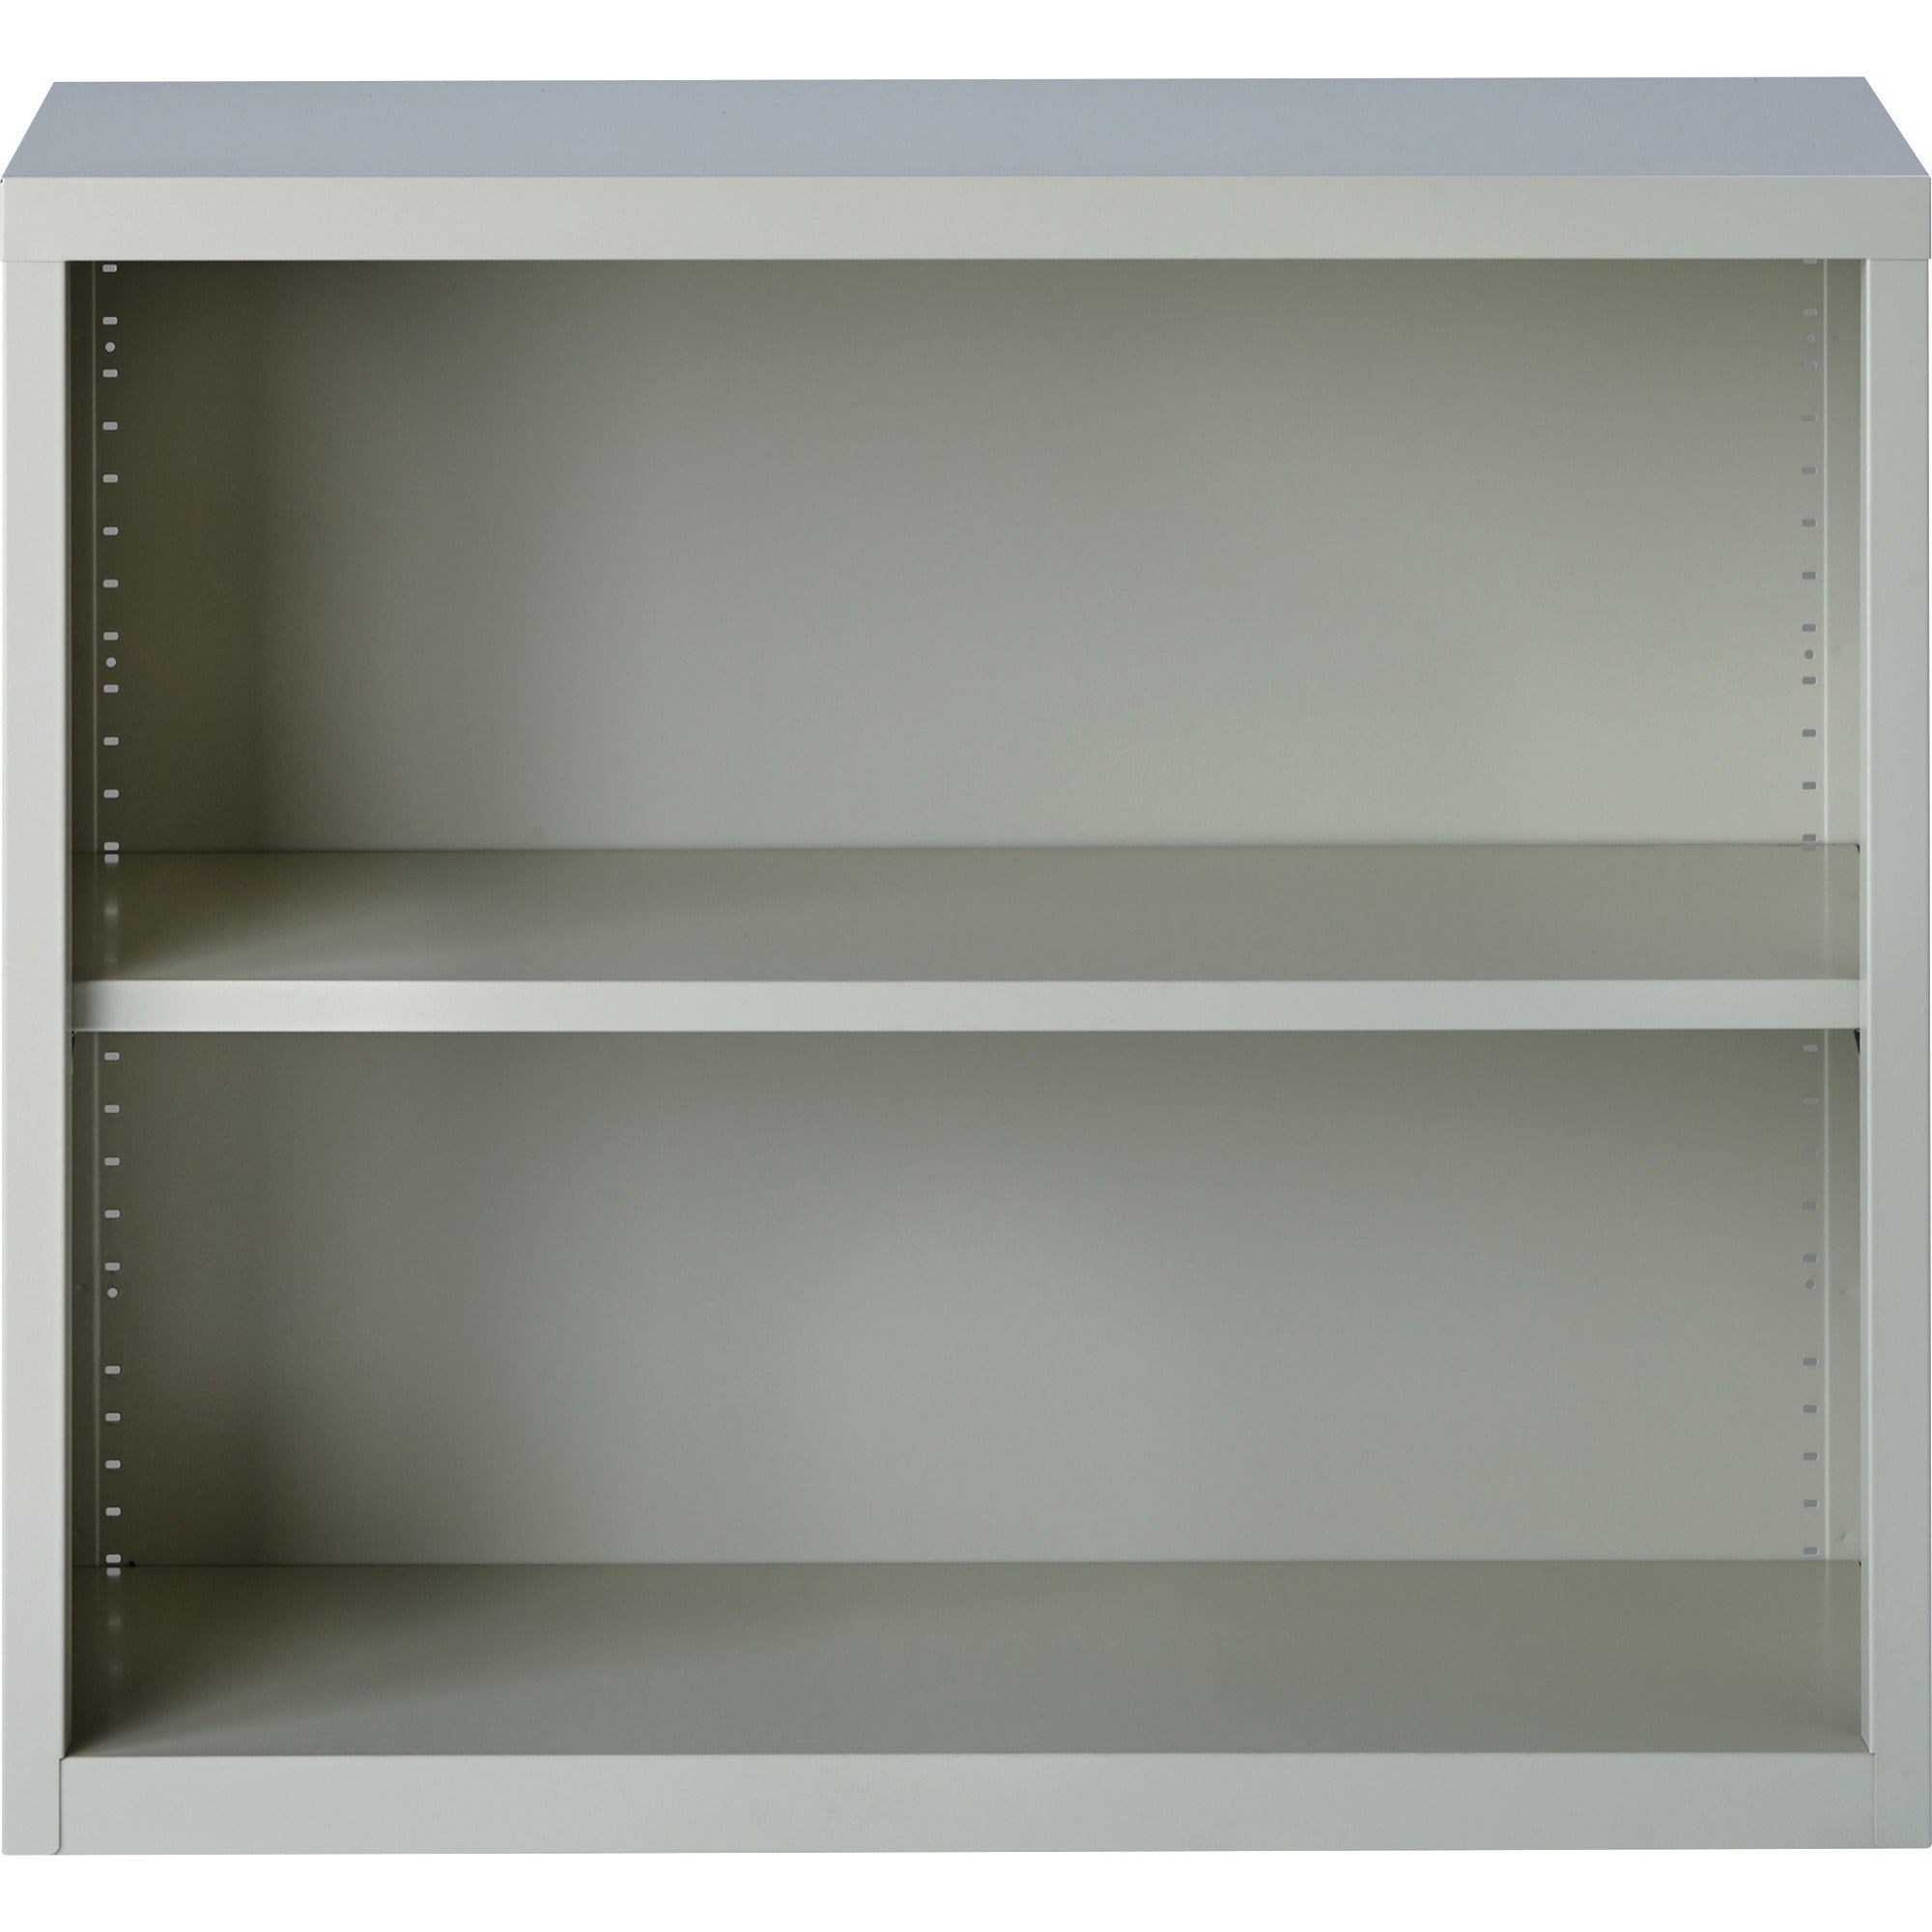 Lorell Fortress Series Bookcase - 34.5" x 13" x 30" - 2 x Shelf(ves) - Light Gray - Powder Coated - Steel - Recycled - 